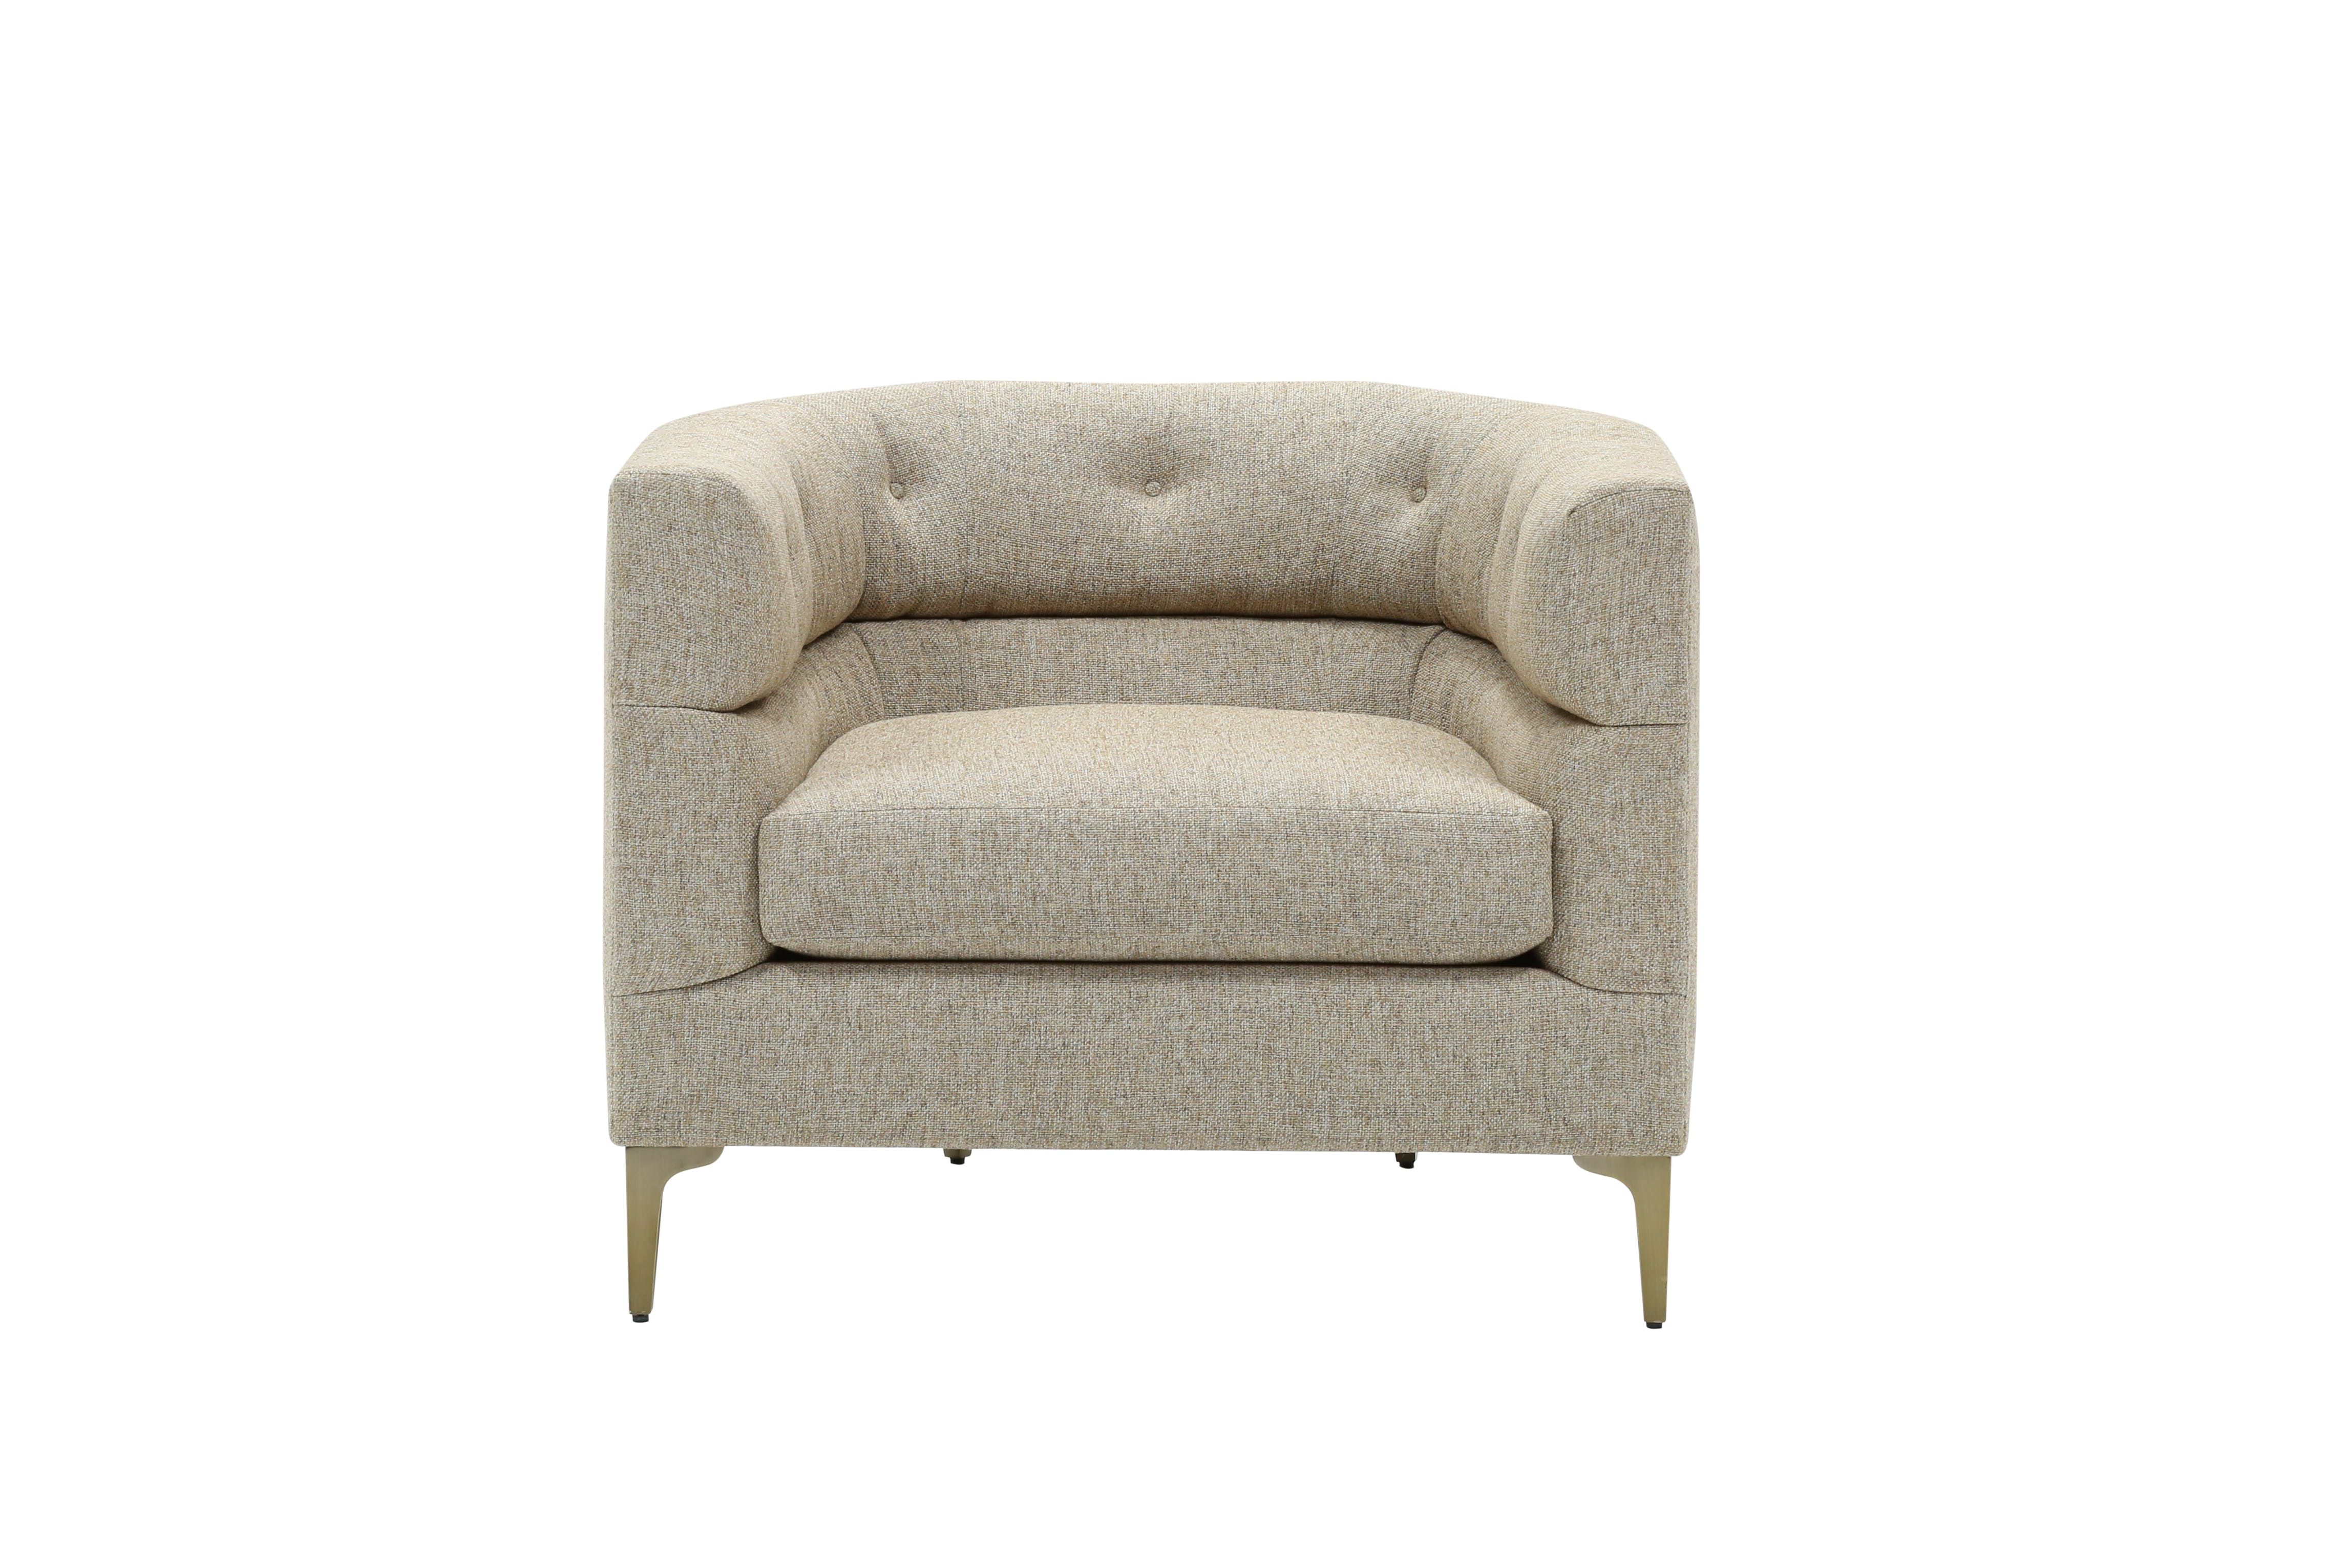 Nate Berkus Just Launched A Home Collection With Hubby Jeremiah Intended For Matteo Arm Sofa Chairs By Nate Berkus And Jeremiah Brent (Photo 1 of 20)